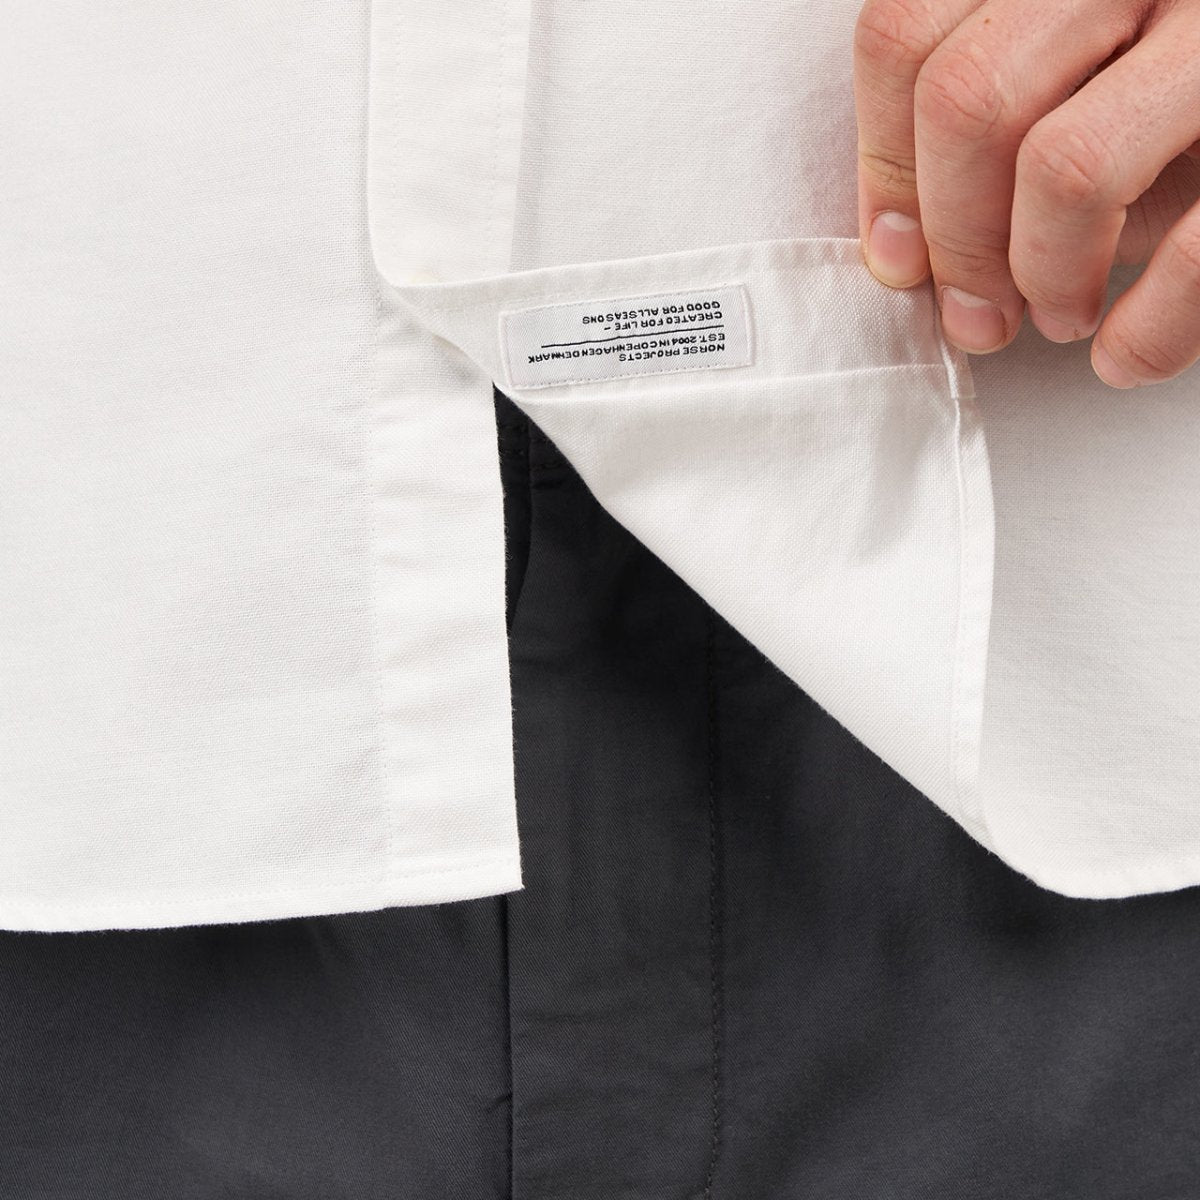 Norse Projects Osvald Oxford SS Shirt (Weiß)  - Allike Store